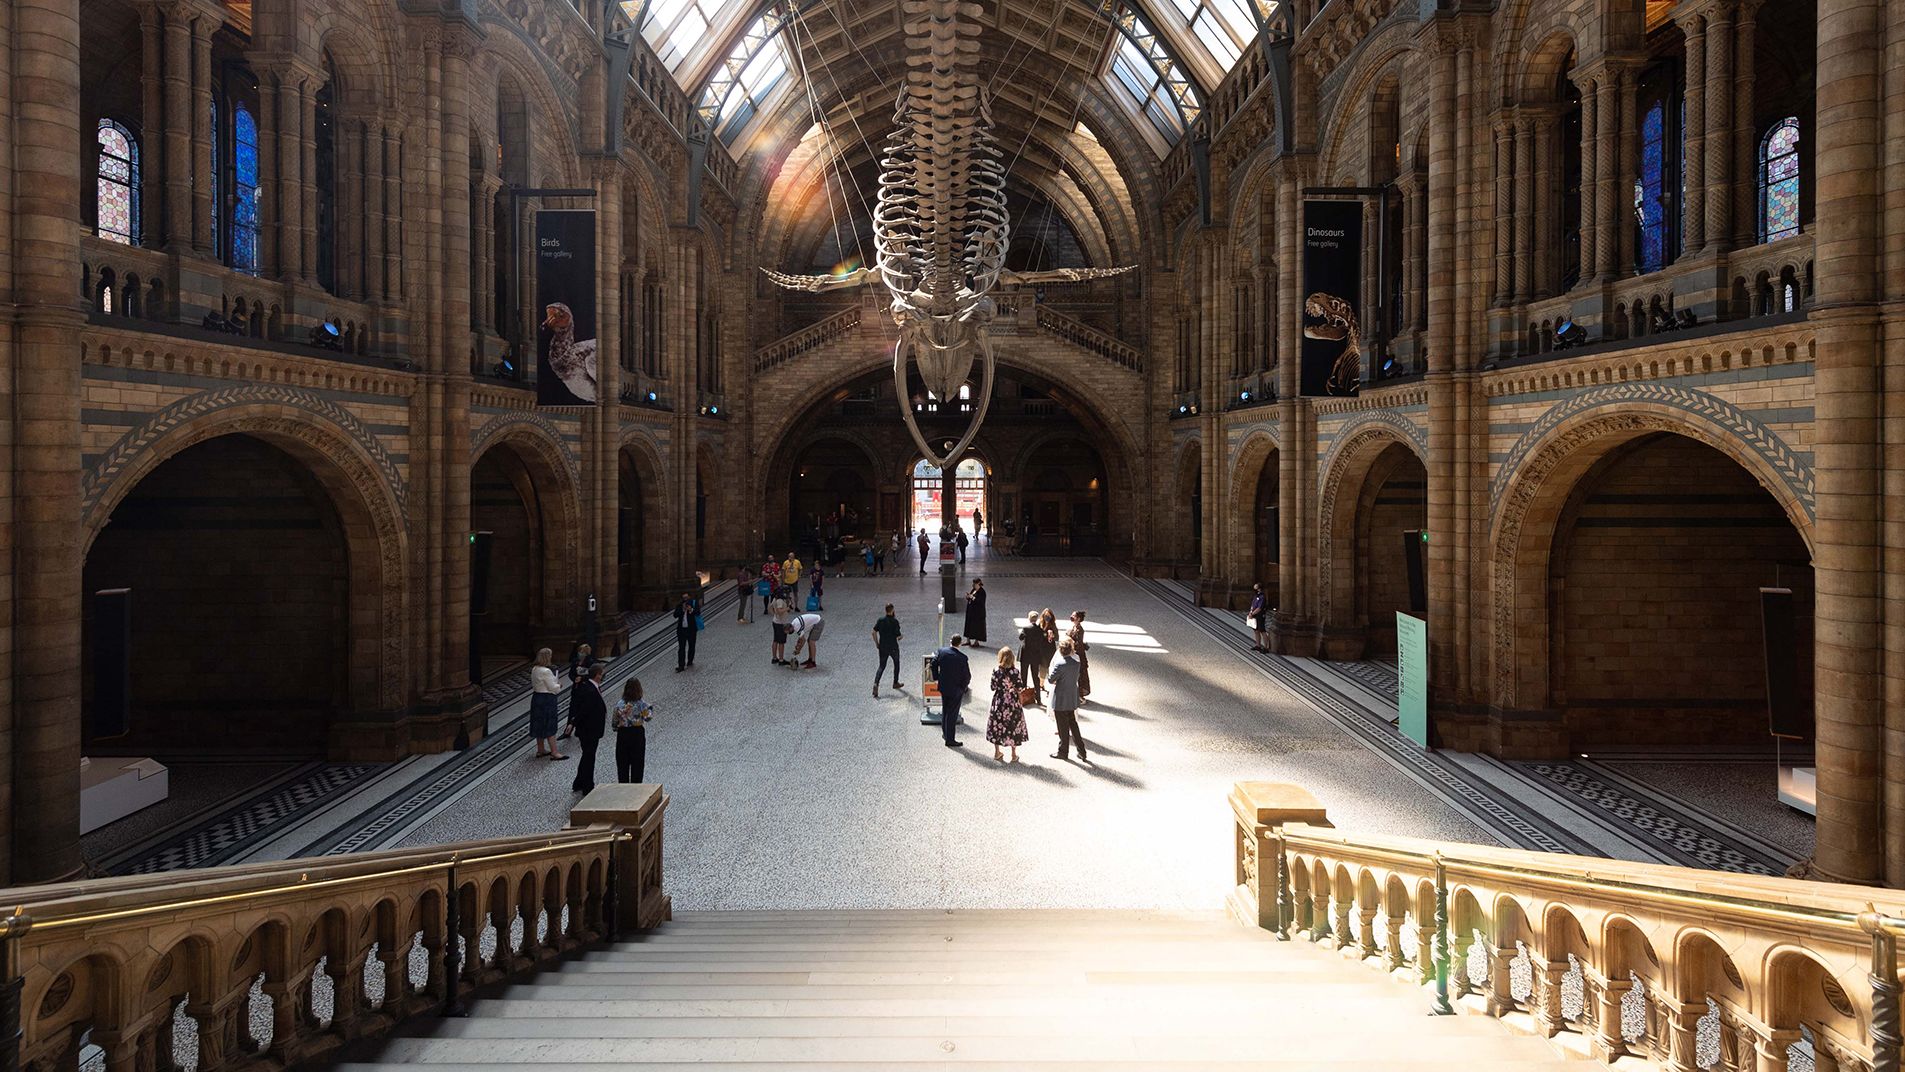 Visitors enjoy the lobby exhibits during the reopening of the Natural History Museum in London on August 5.